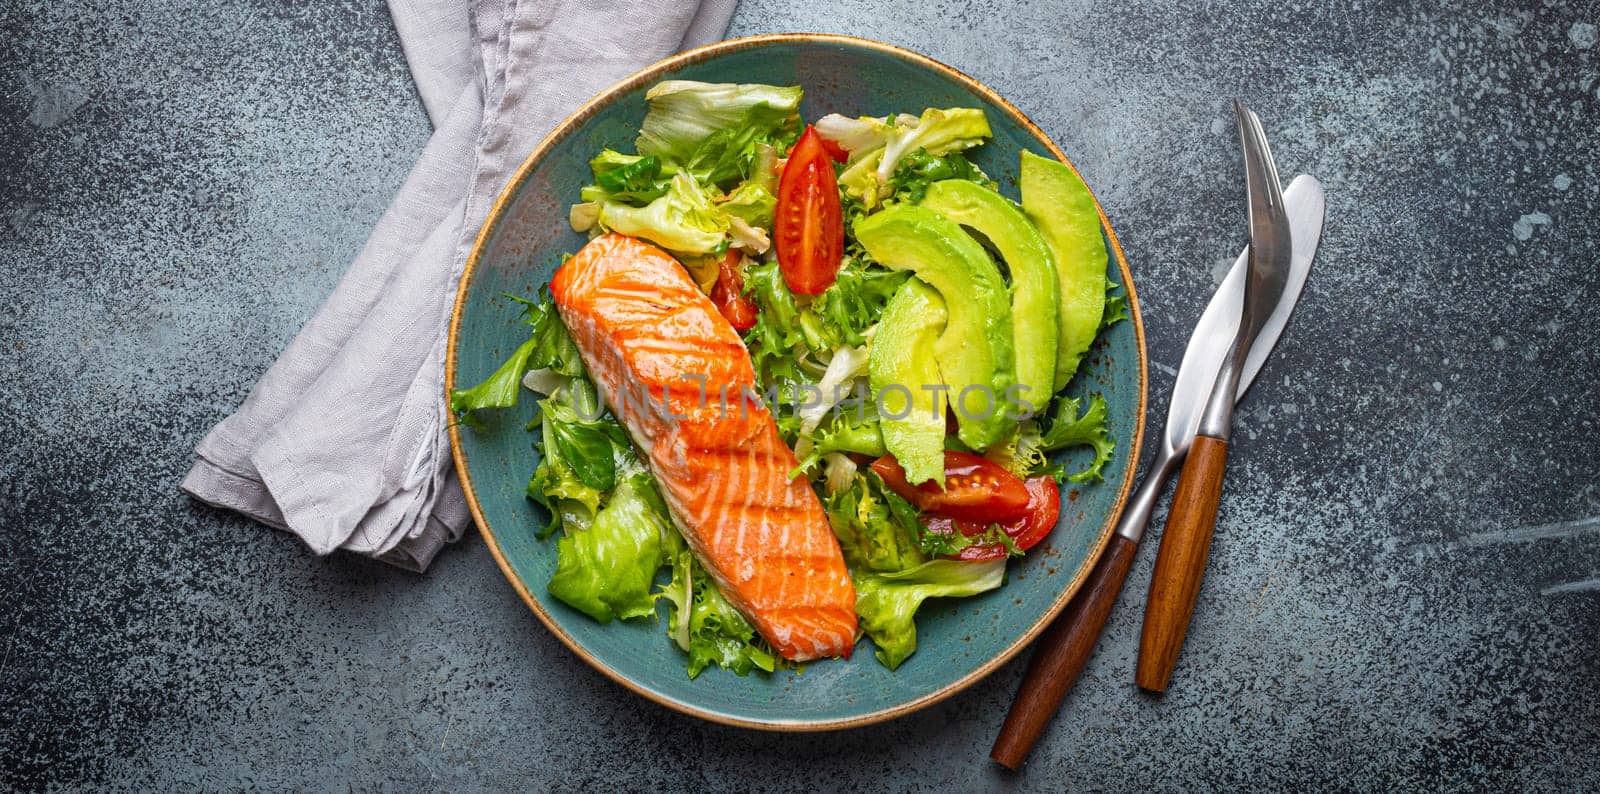 Grilled fish salmon steak and vegetables salad with avocado on ceramic plate on rustic stone background top view, balanced diet, healthy nutrition salad meal with salmon and veggies by its_al_dente